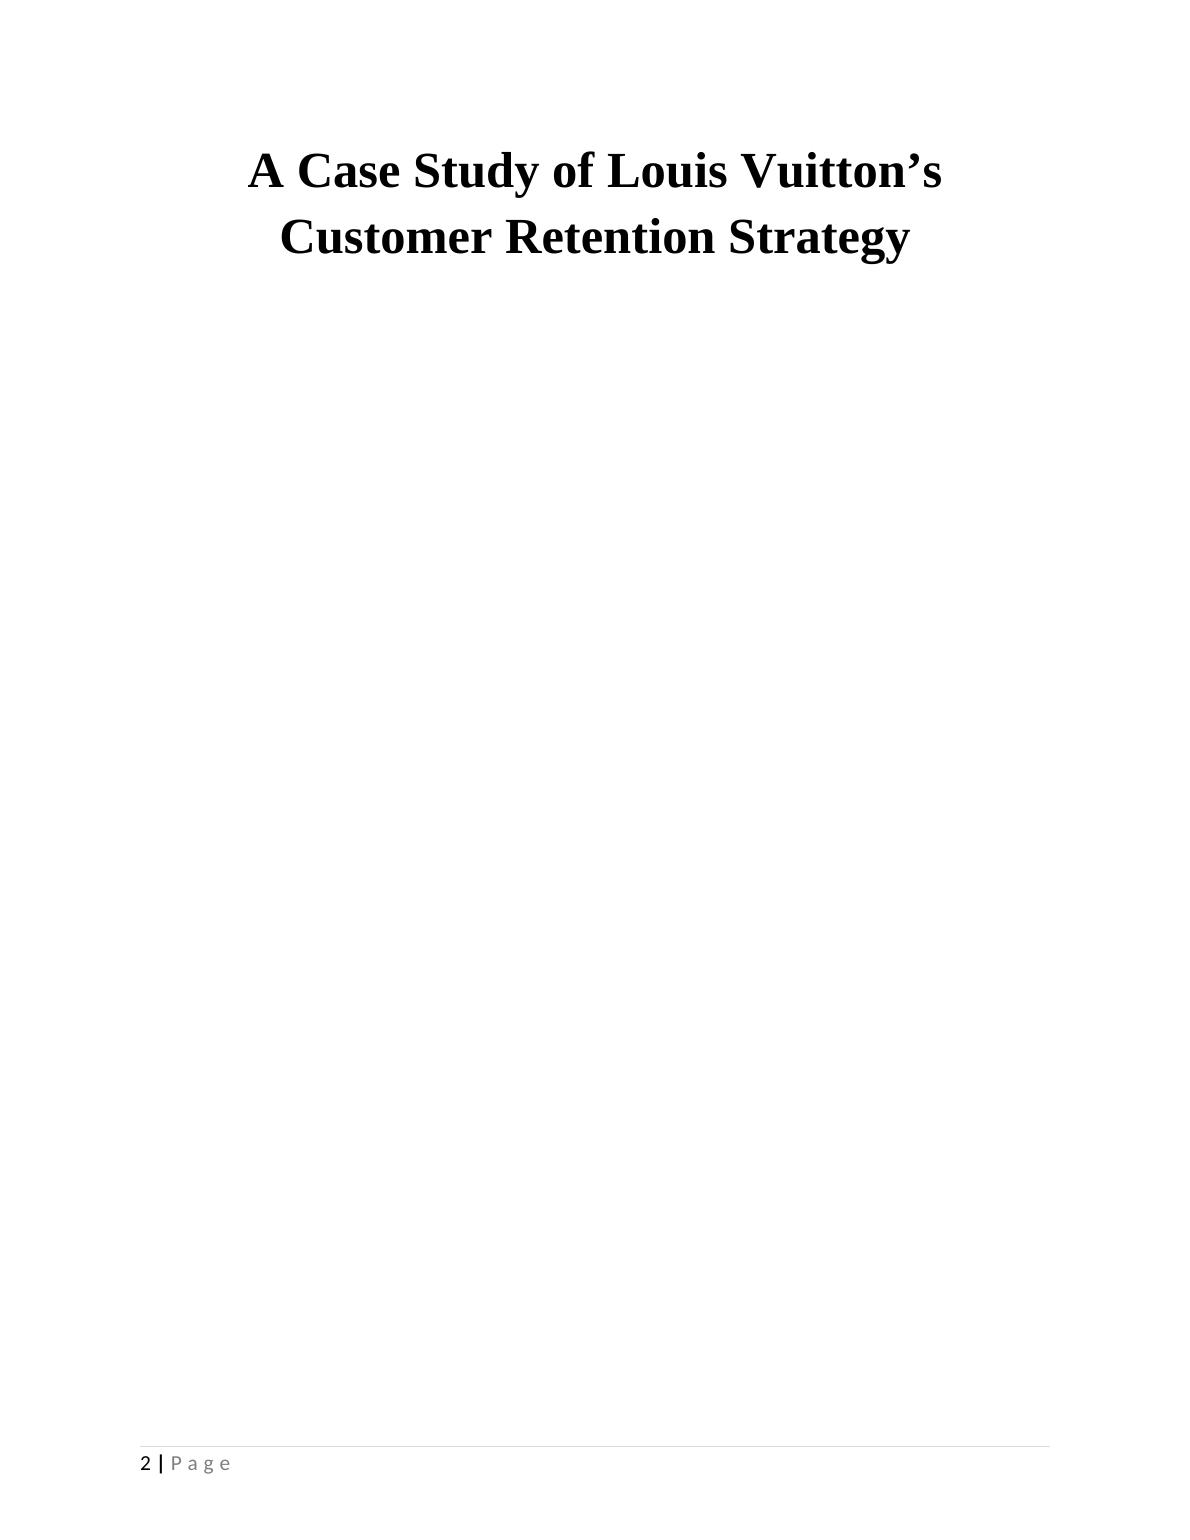 A Critical Analysis of Relationship between Brand Identity and Customer Retention_2